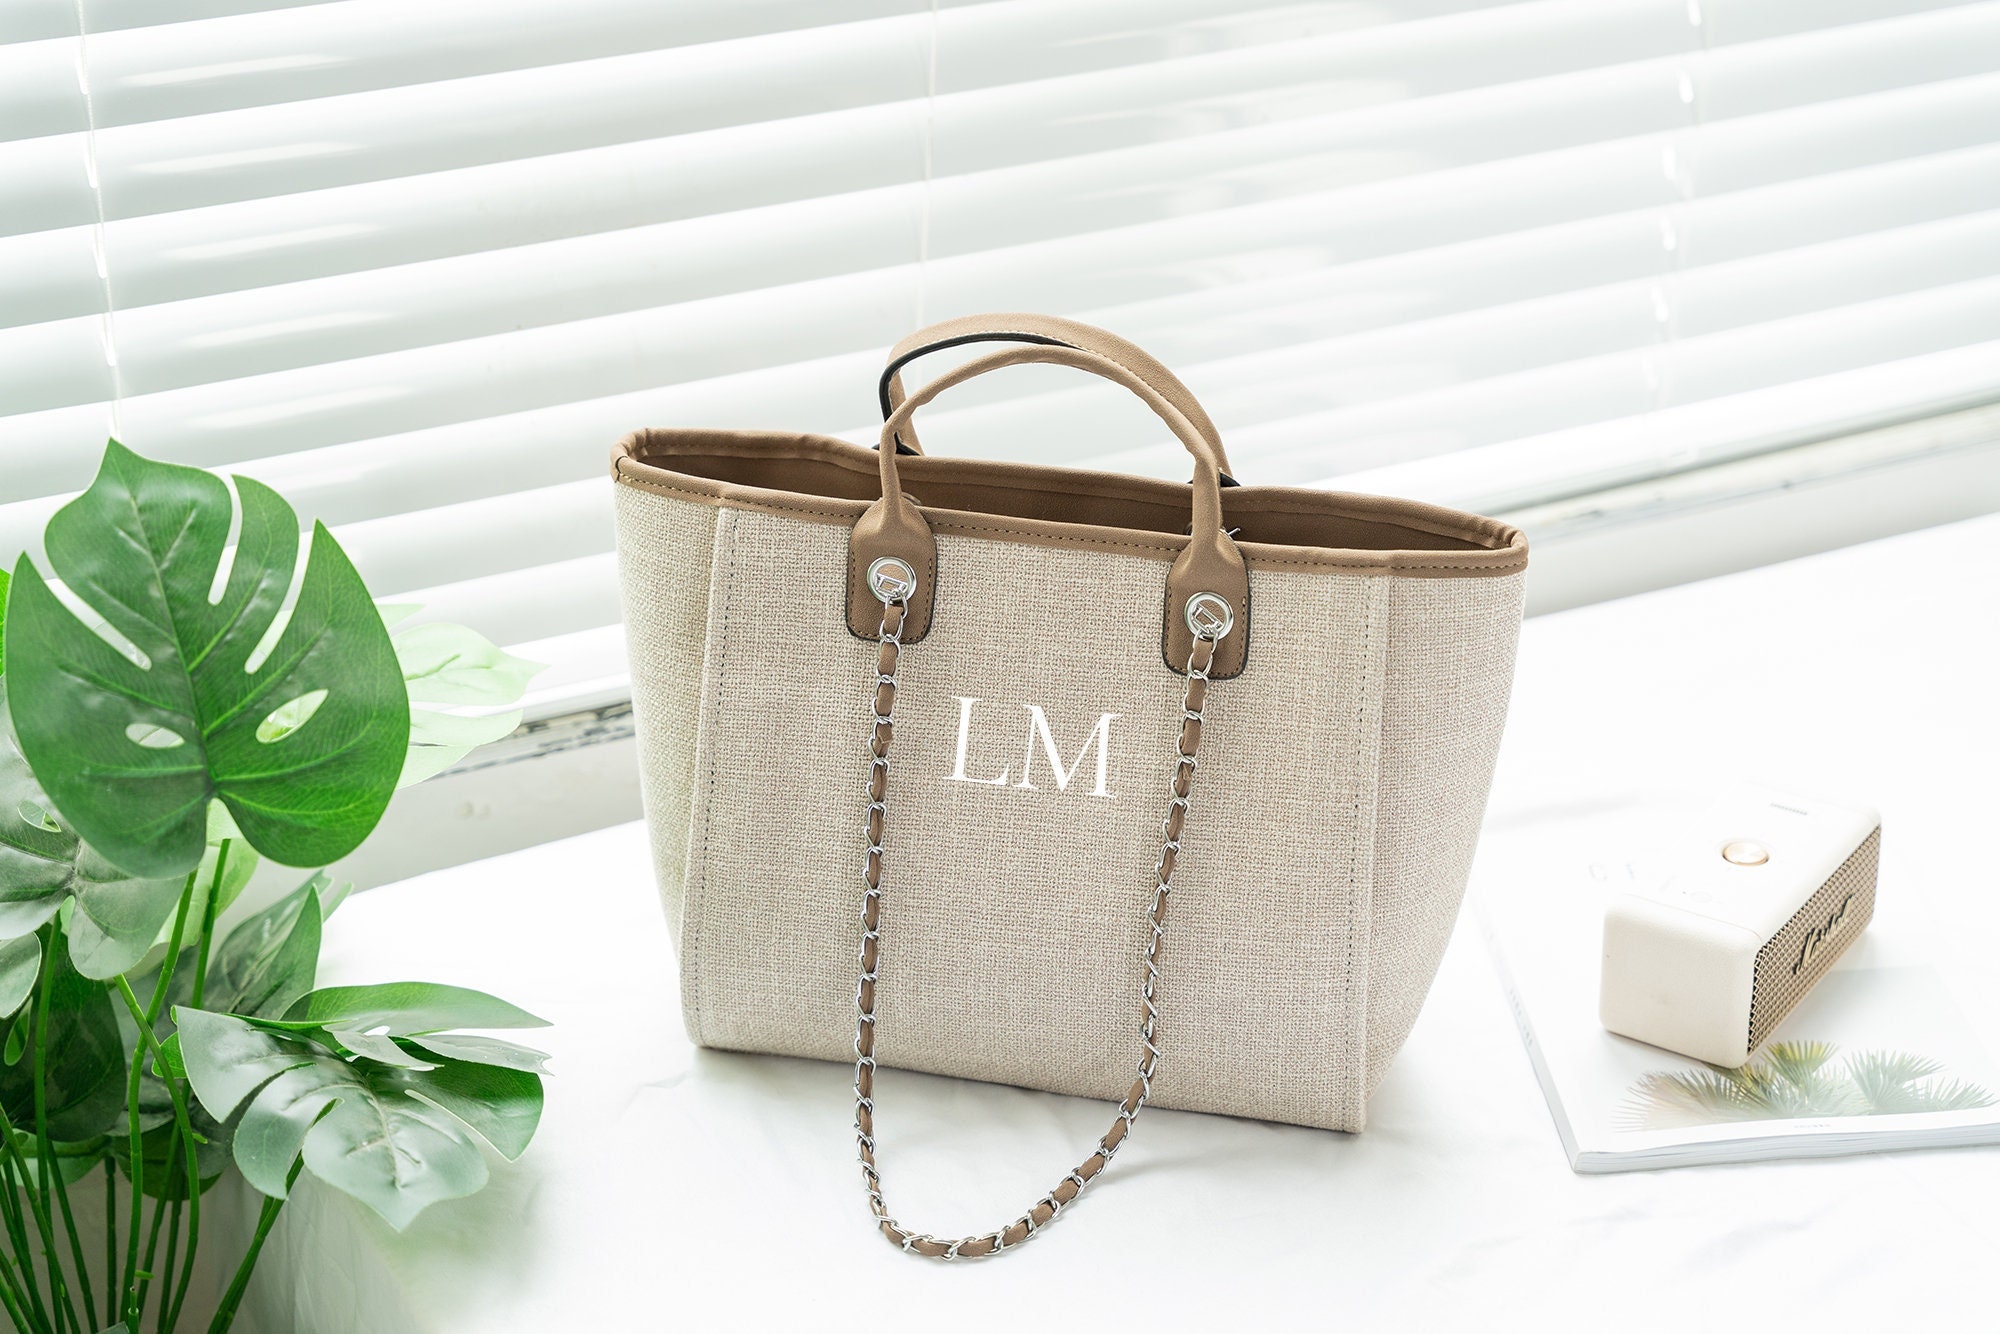 Lamyba Personalized Initial Canvas Beach Bag, Monogrammed Gift Tote Bag for Women with Makeup Bag and Top Zipper, Letter B